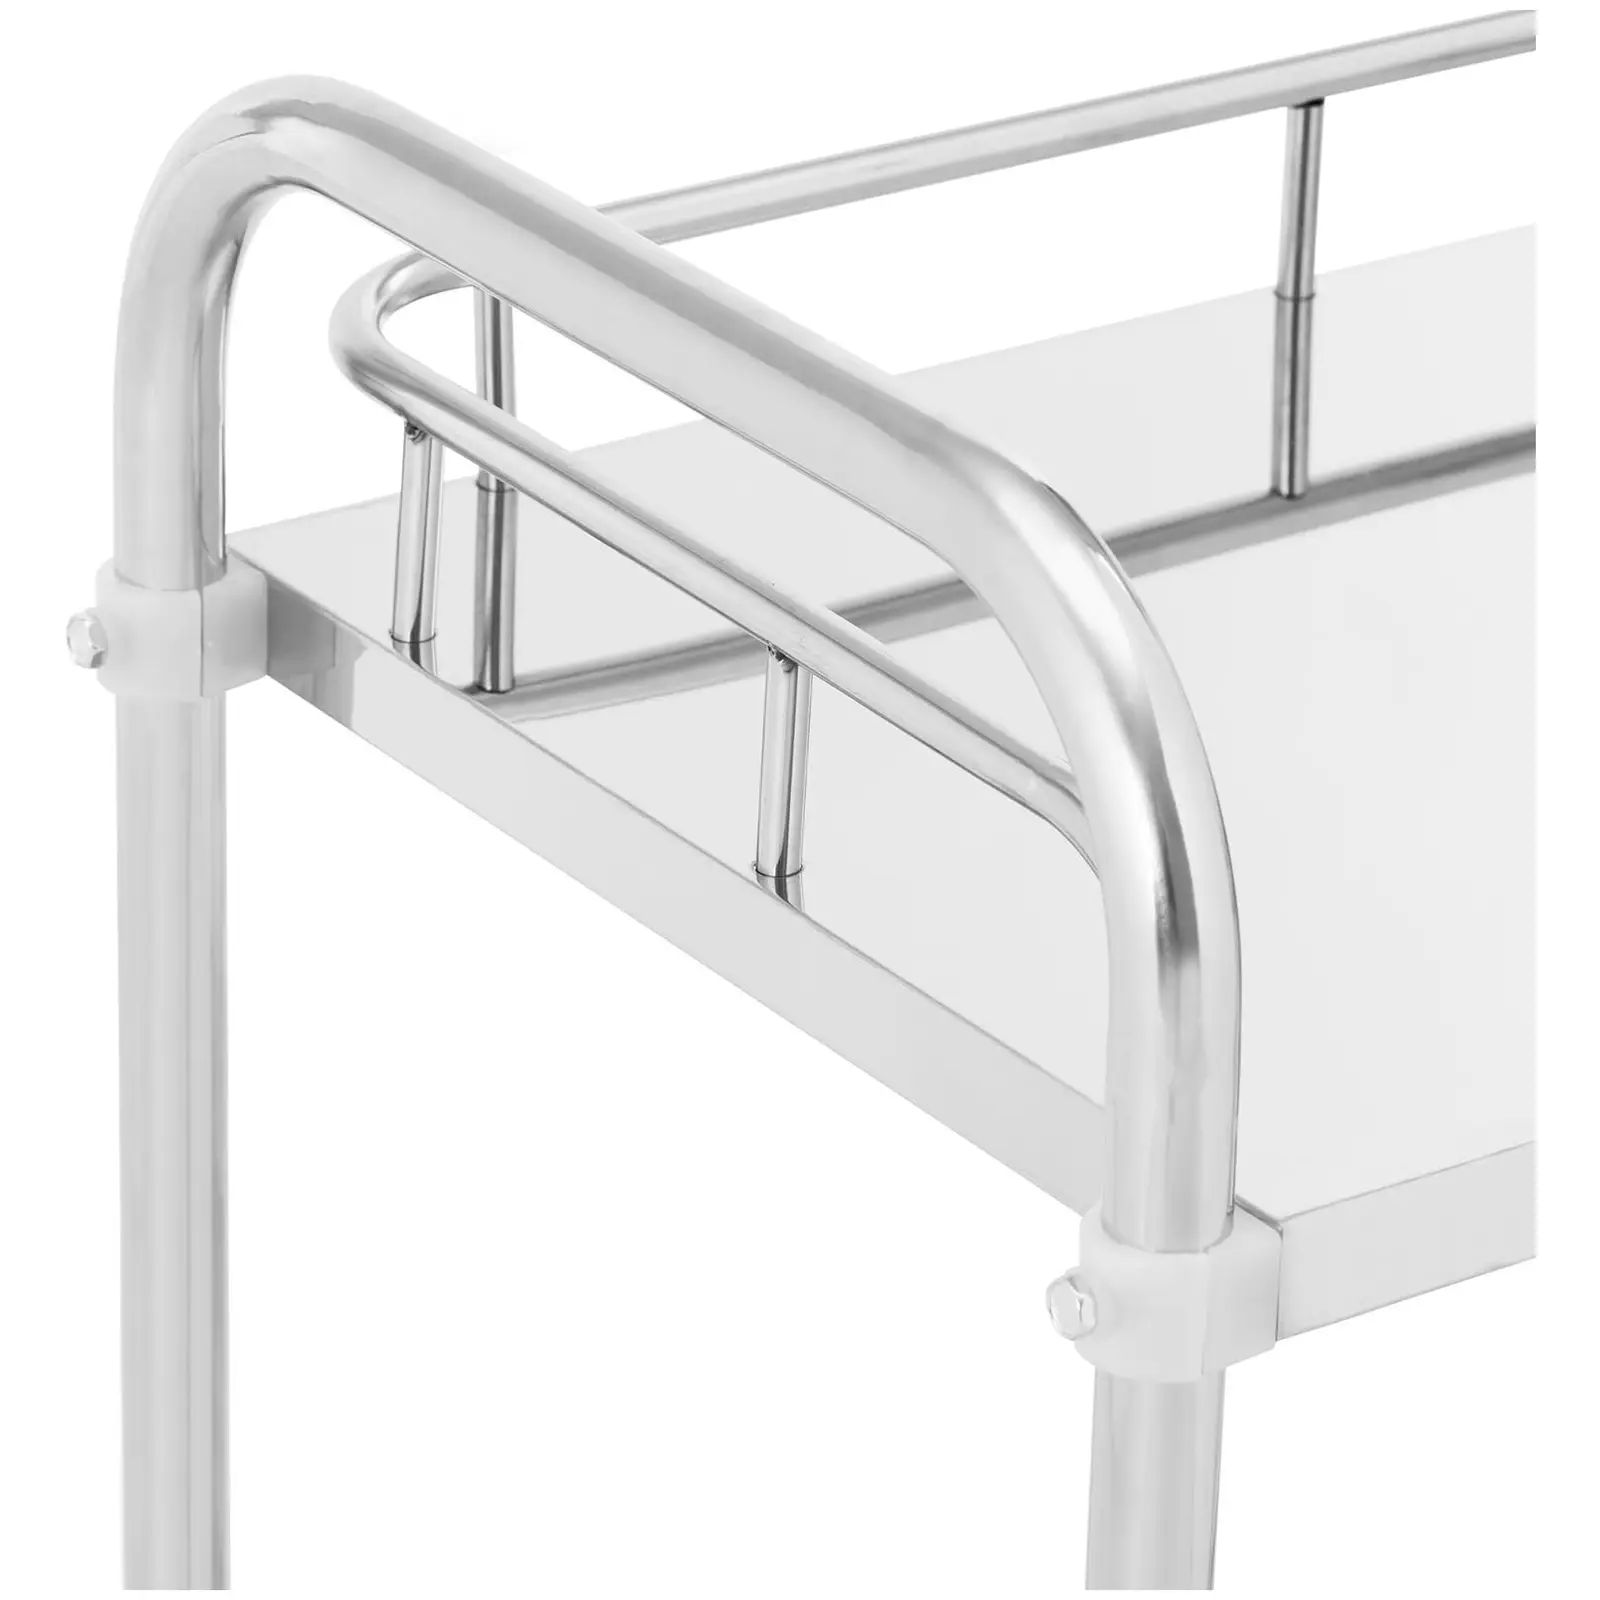 Laboratory Trolley - stainless steel - 2 shelves each 55 x 36 x 2.5 cm - 10 kg